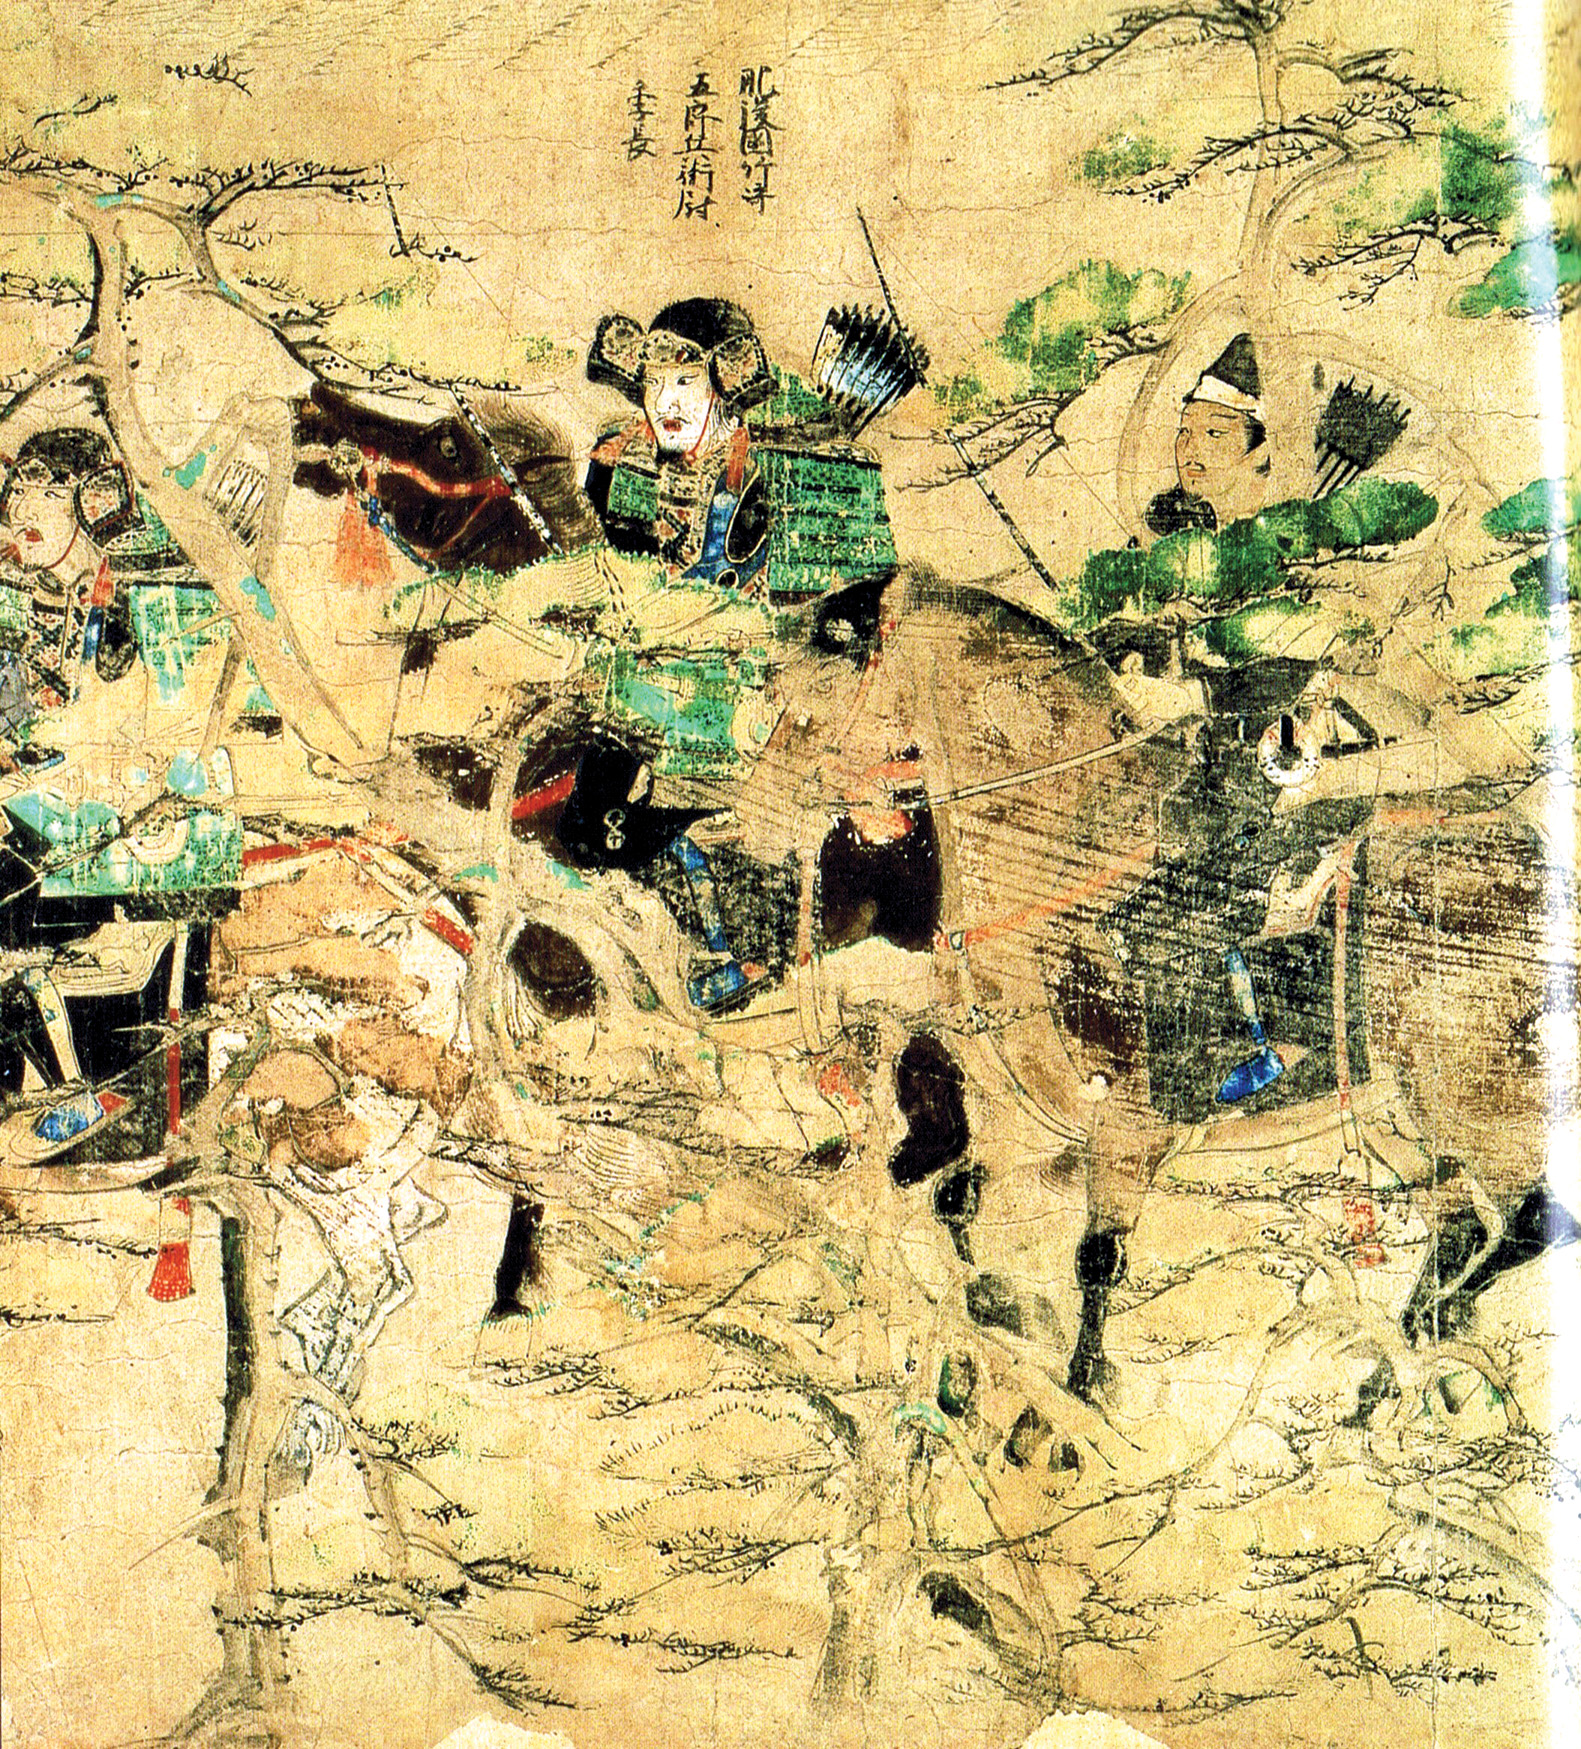 Mounted Japanese soldiers ride through a pine forest during the Mongolian invasion of Japan in 1274 in a 20th-century illustration. The Japanese defense against the Mongol invasion was plagued by the glory-hungry nature of samurai who exhibited a lack of discipline, thinking instead of personal honor and glory through individual combat.